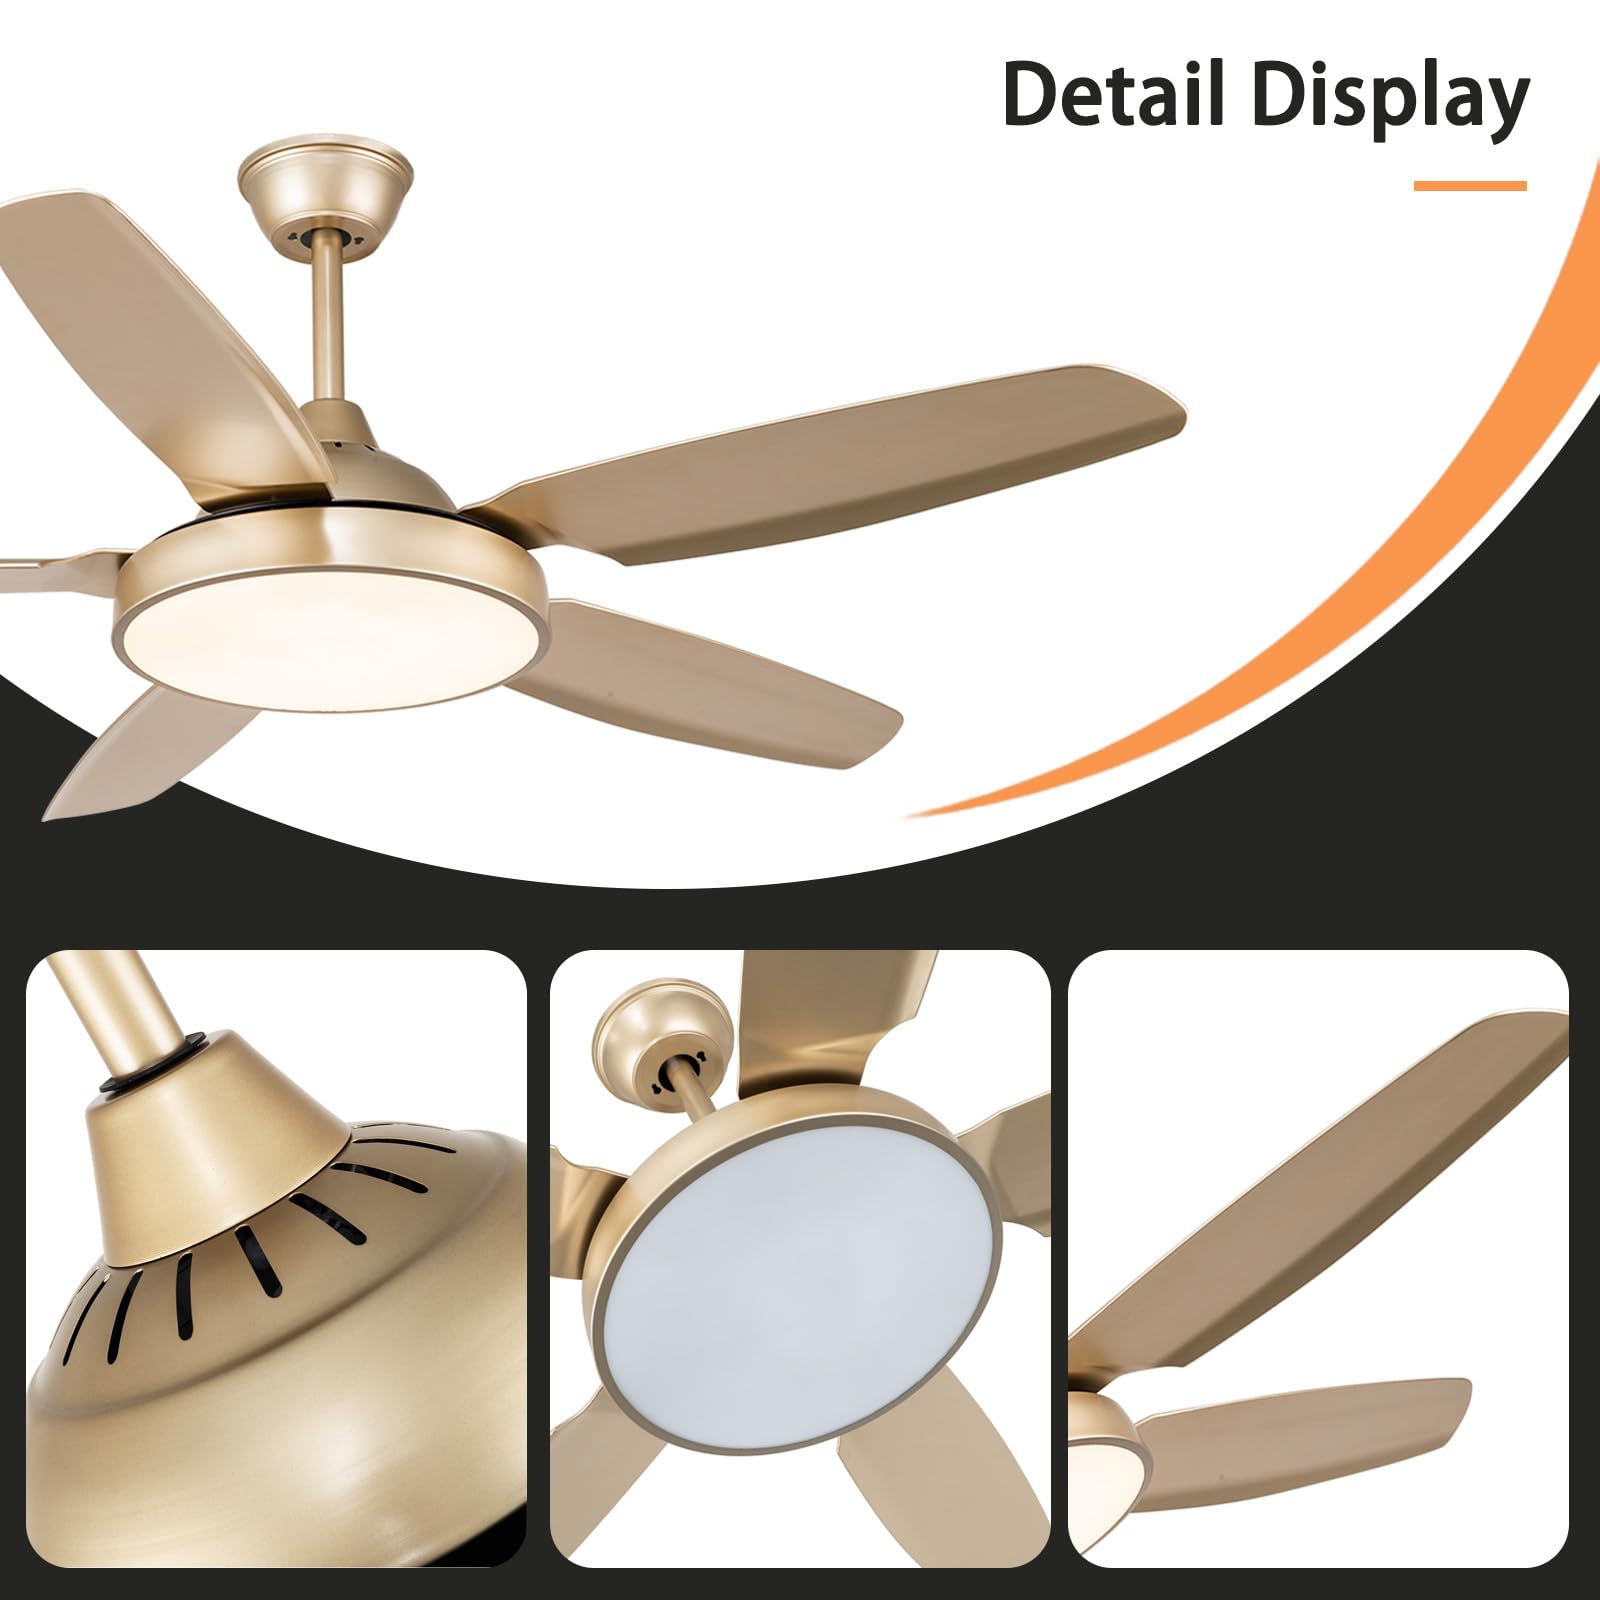 Morpholife 52" Gold Ceiling Fan with Lights Remote Control, Modern Champagne LED Chandelier Ceiling Fan Light Kit, Indoor Farmhouse Rustic Ceiling Fan with 5 Abs Blades for Living Room, Bedroom